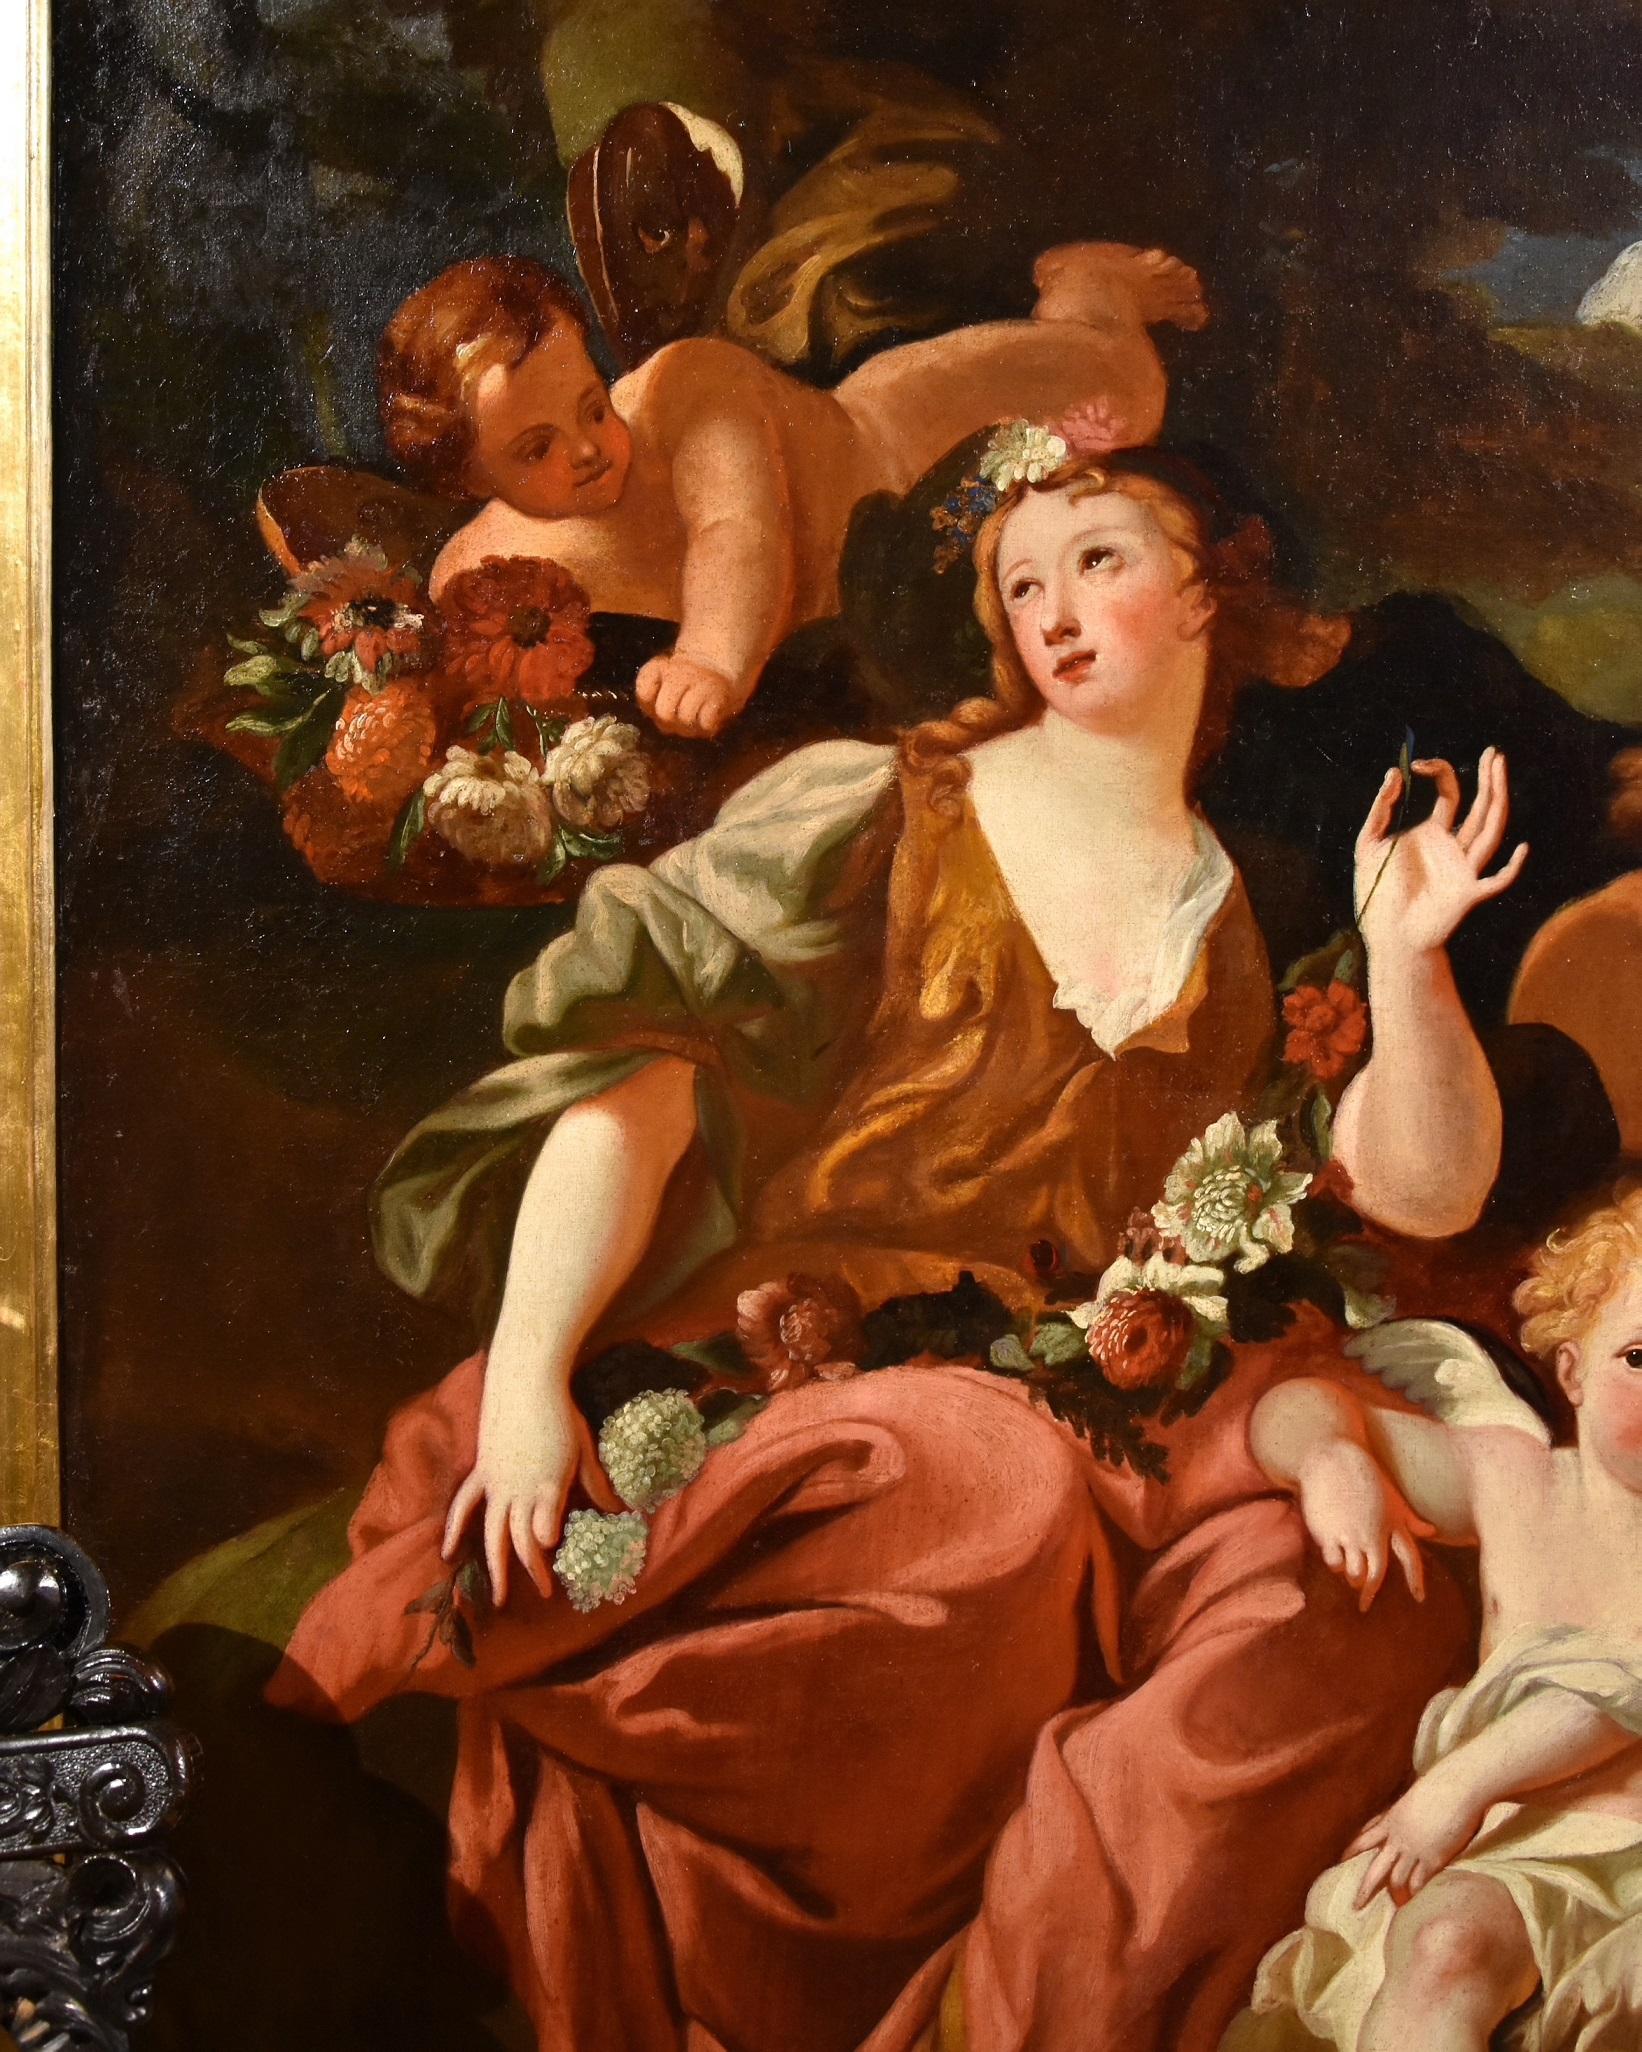 Allegory Of Spring Cazes Paint Oil on canvas Old master 18th Century French Art - Old Masters Painting by Pierre-Jacques Cazes (Paris 1676 - 1754)